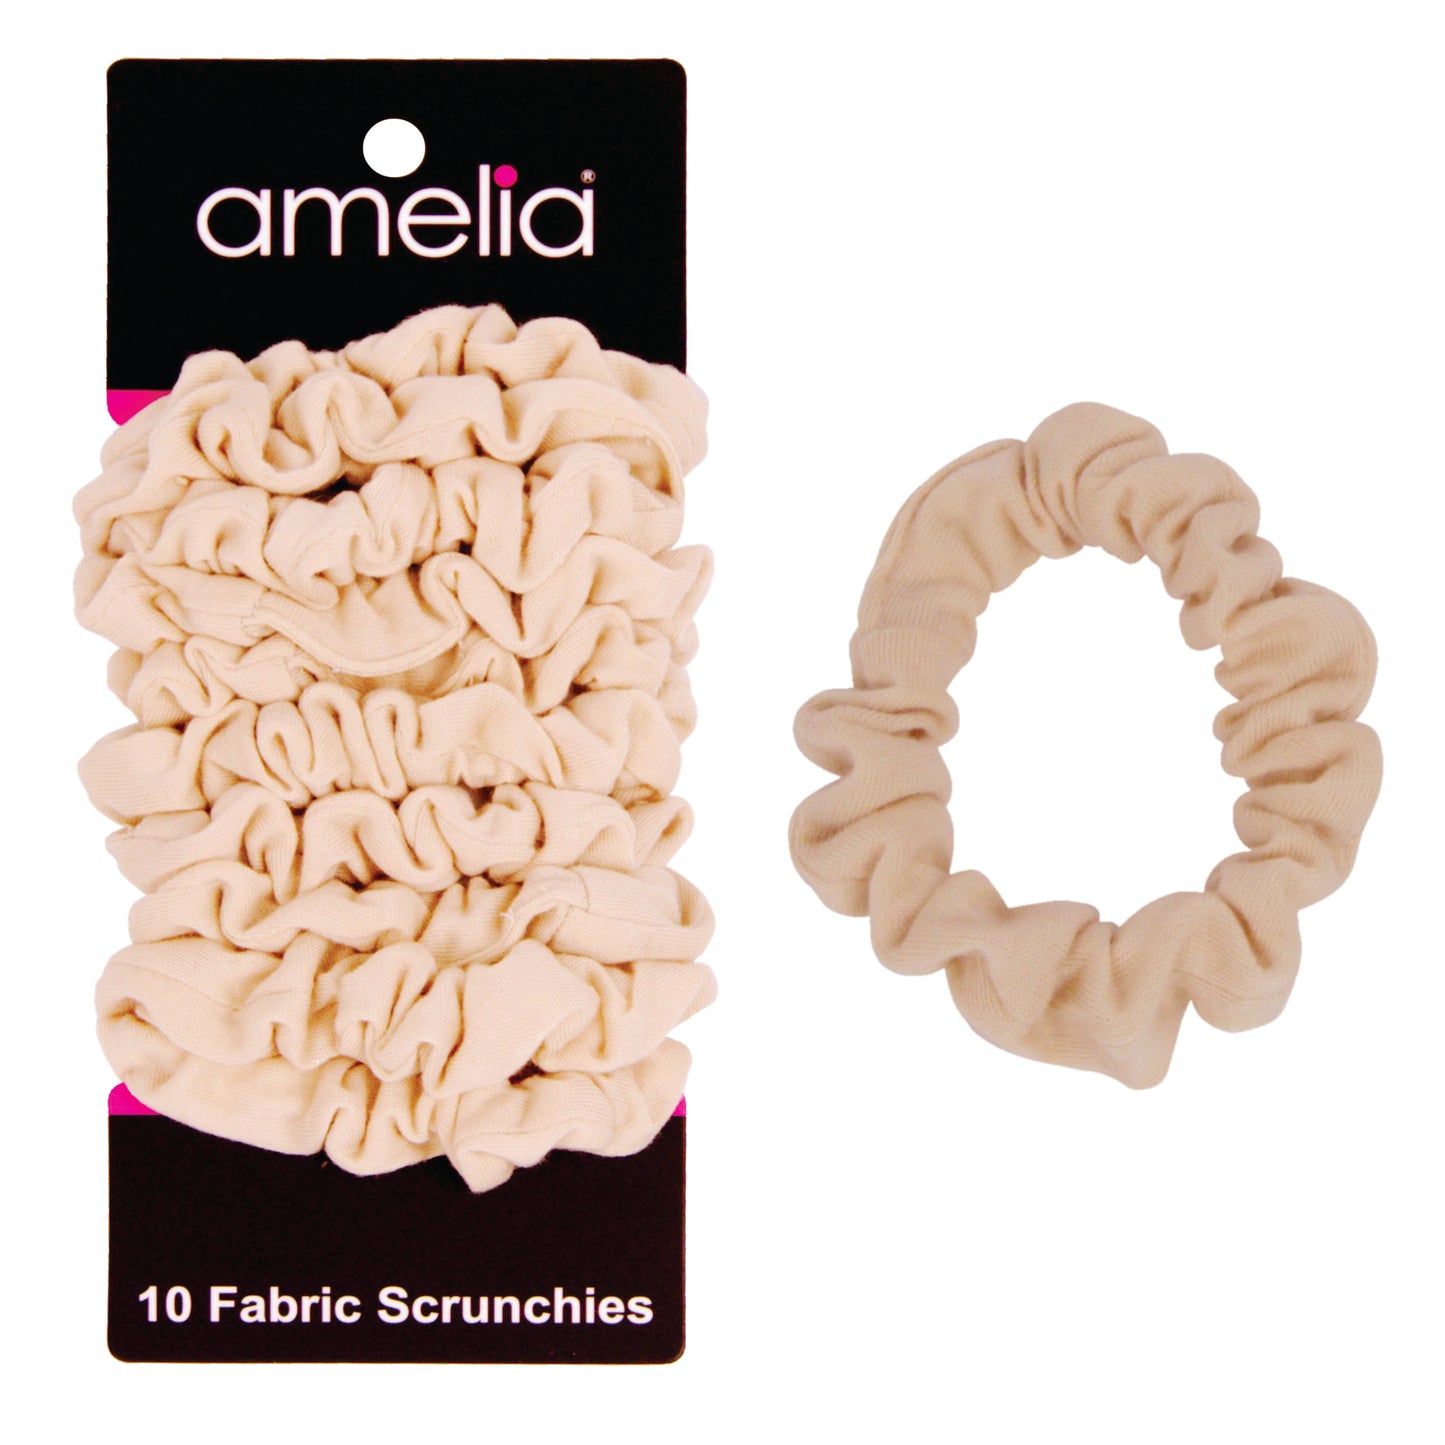 Amelia Beauty, Medium Tan Jersey Scrunchies, 2.5in Diameter, Gentle on Hair, Strong Hold, No Snag, No Dents or Creases. 10 Pack